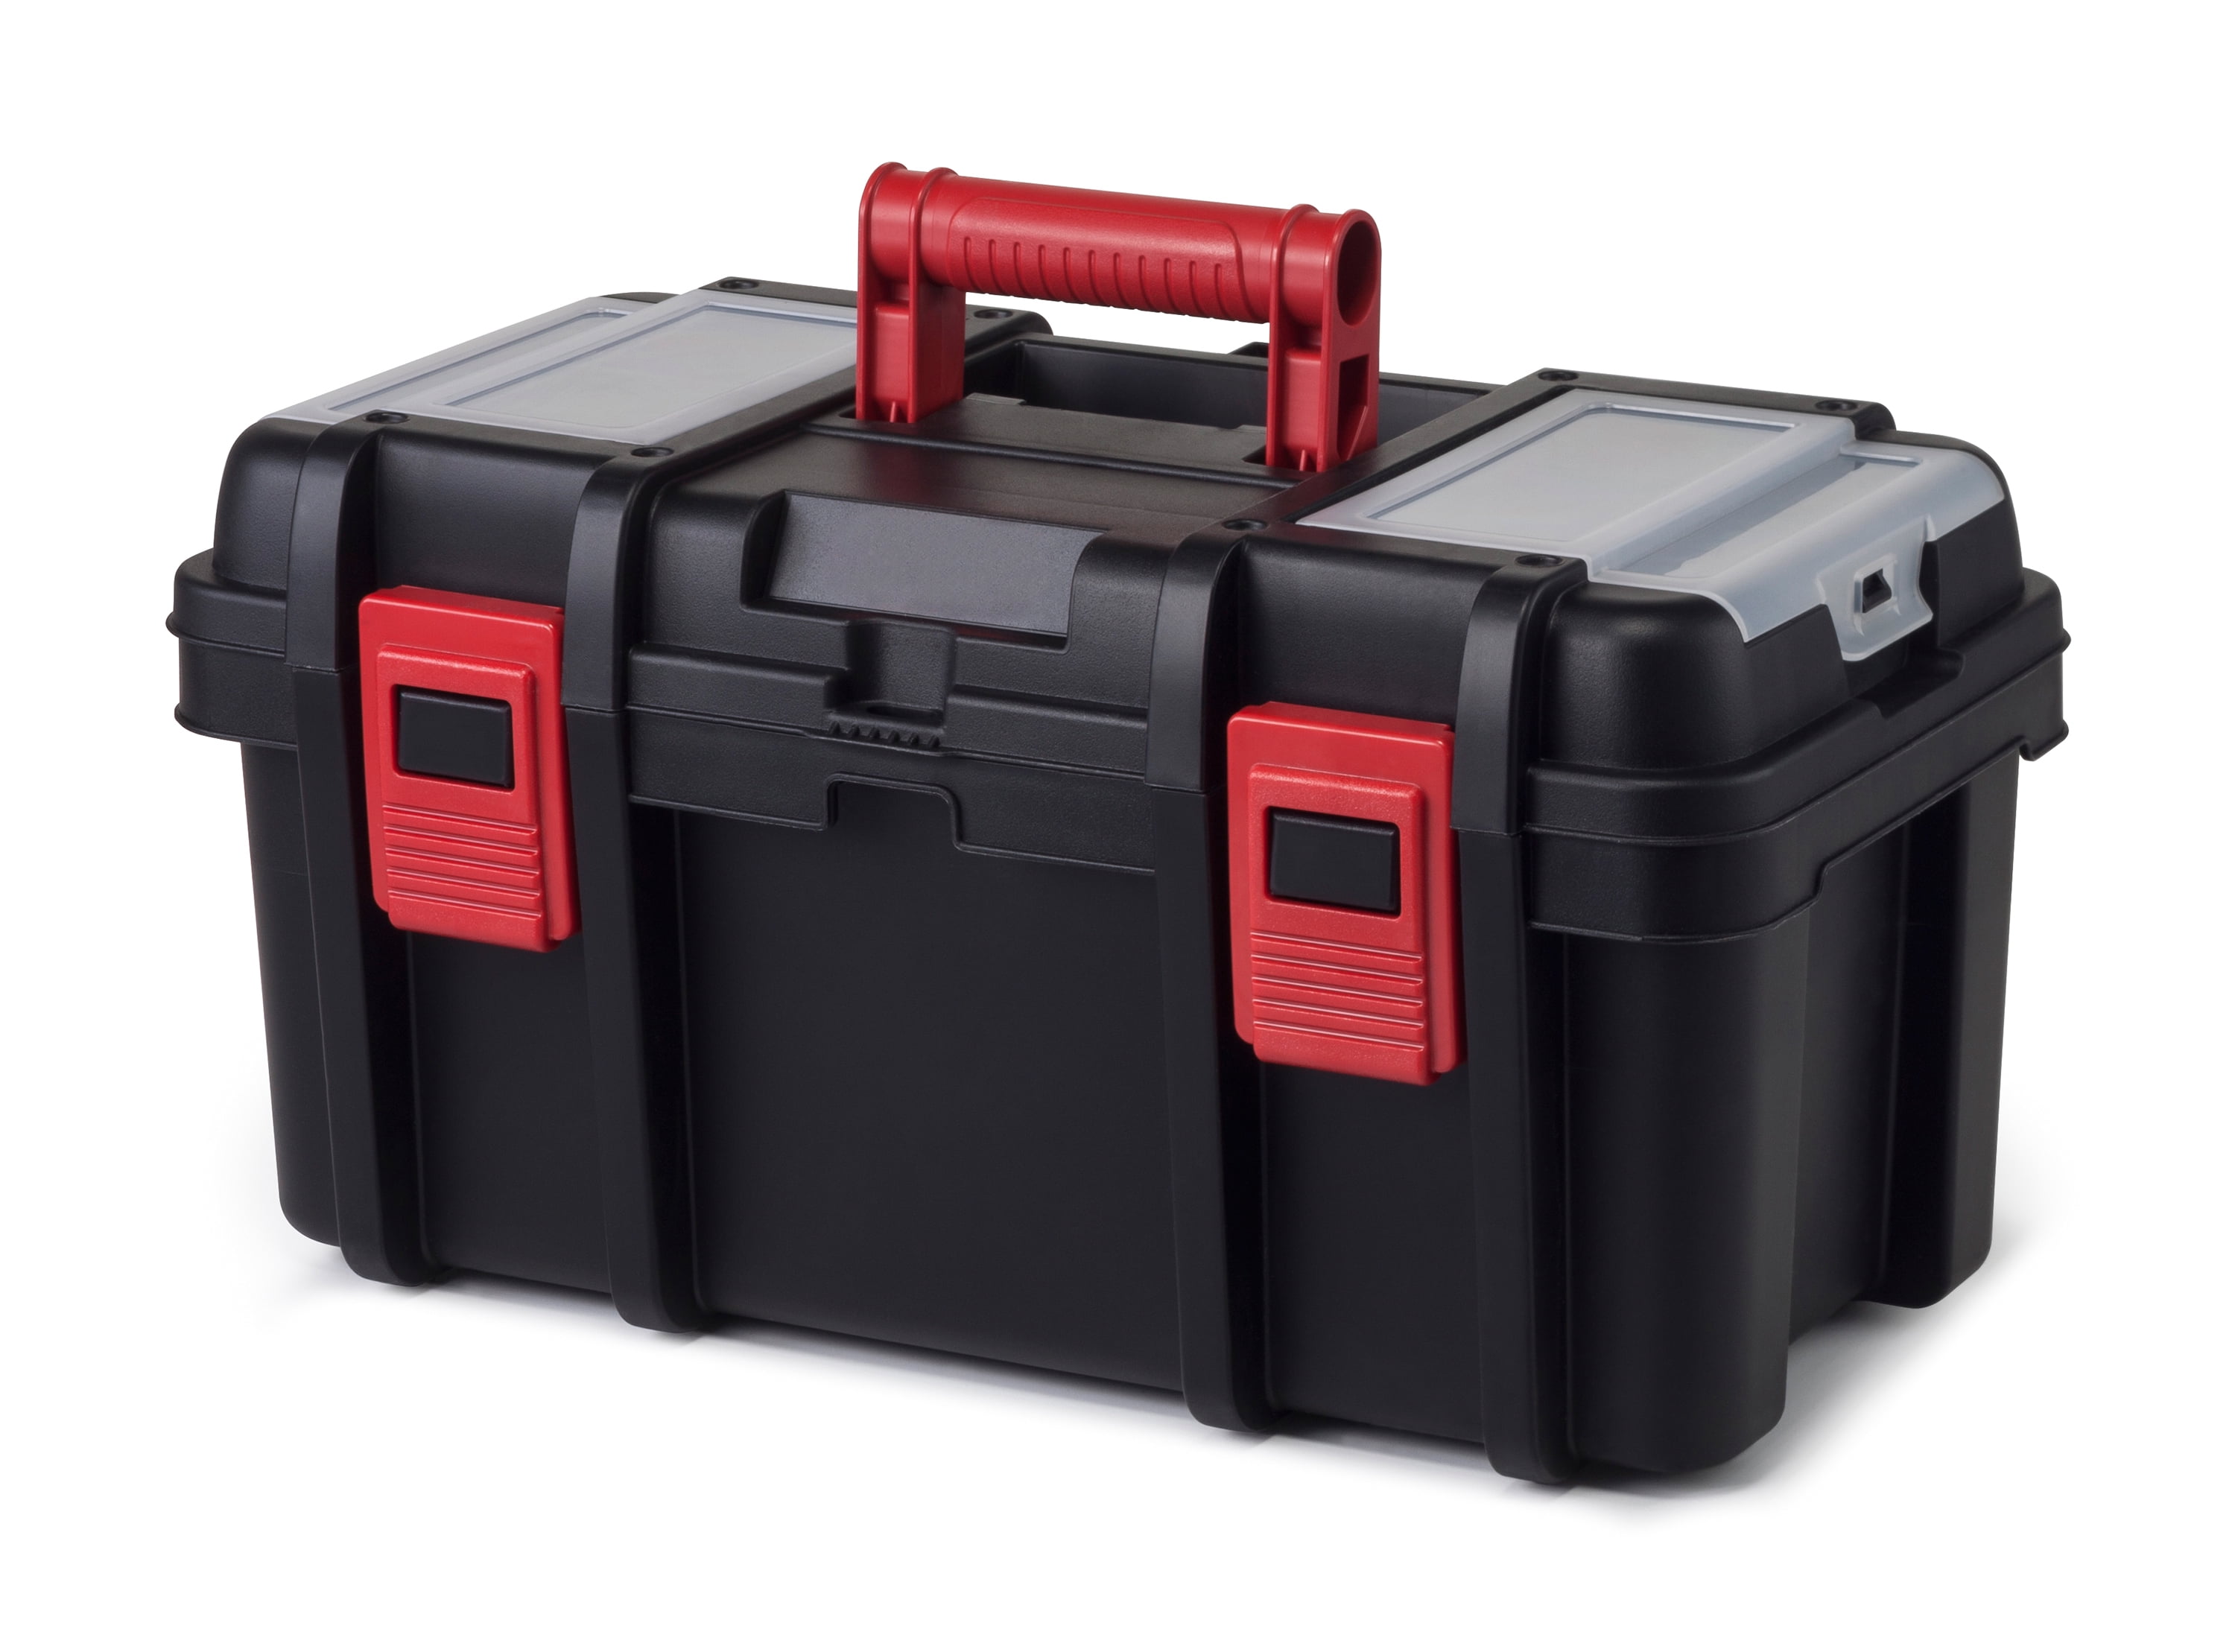 10-inch Tool Box with Tray and Organizers Includes Three Small